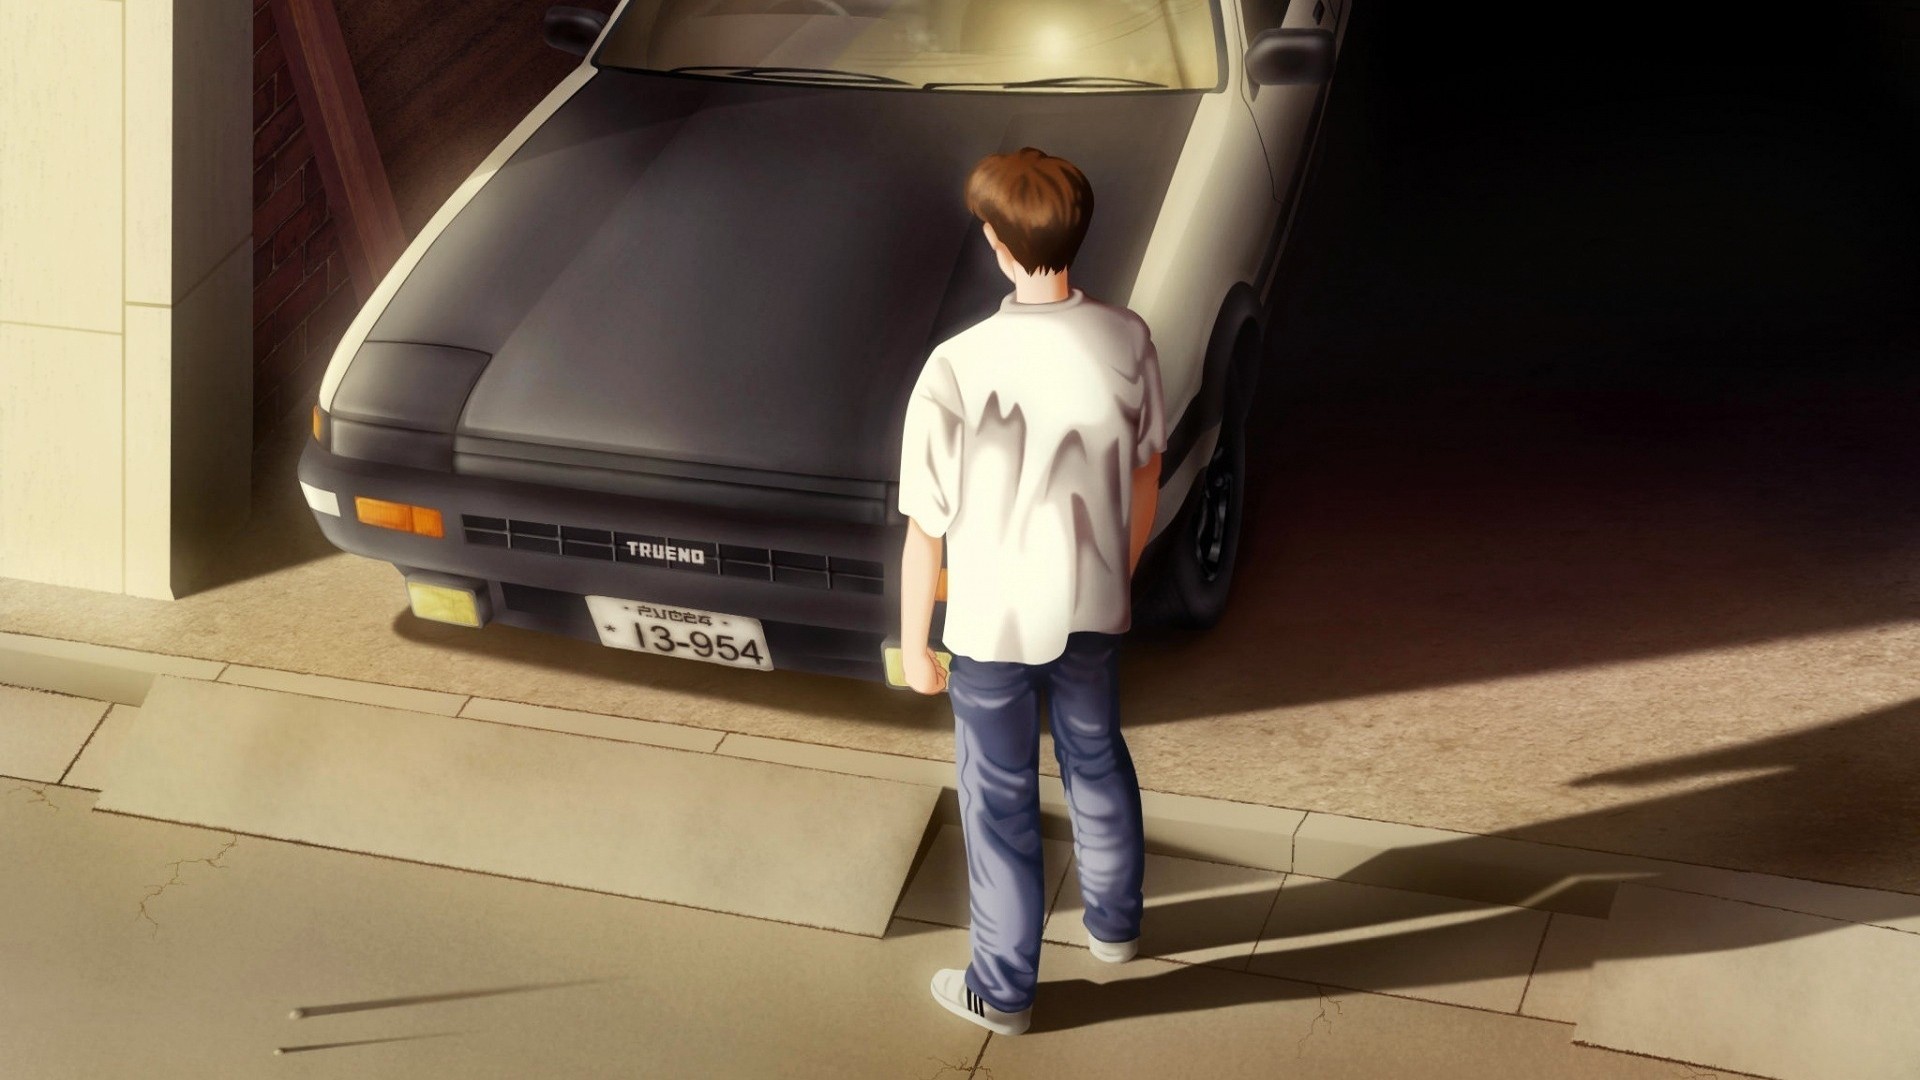 Cars Toyota AE86 Initial D wallpaper  1600x1200  290989  WallpaperUP